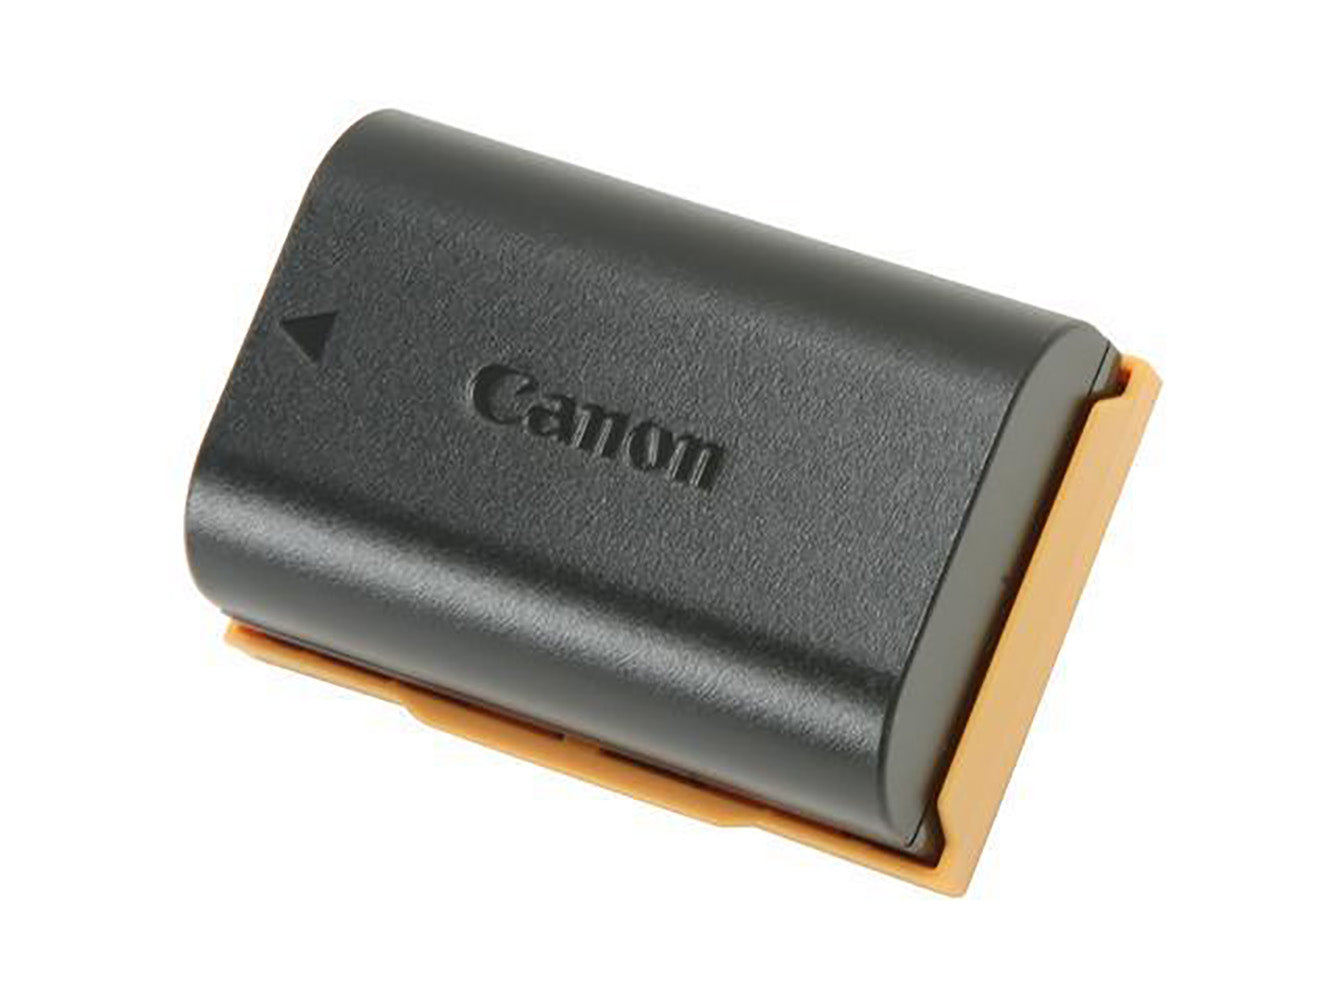 Pxel Canon LP-E6 Replacement Rechargeable Lithium-Ion Battery Pack 7.2V 1800mAh for Select Canon EOS Cameras (Class A)